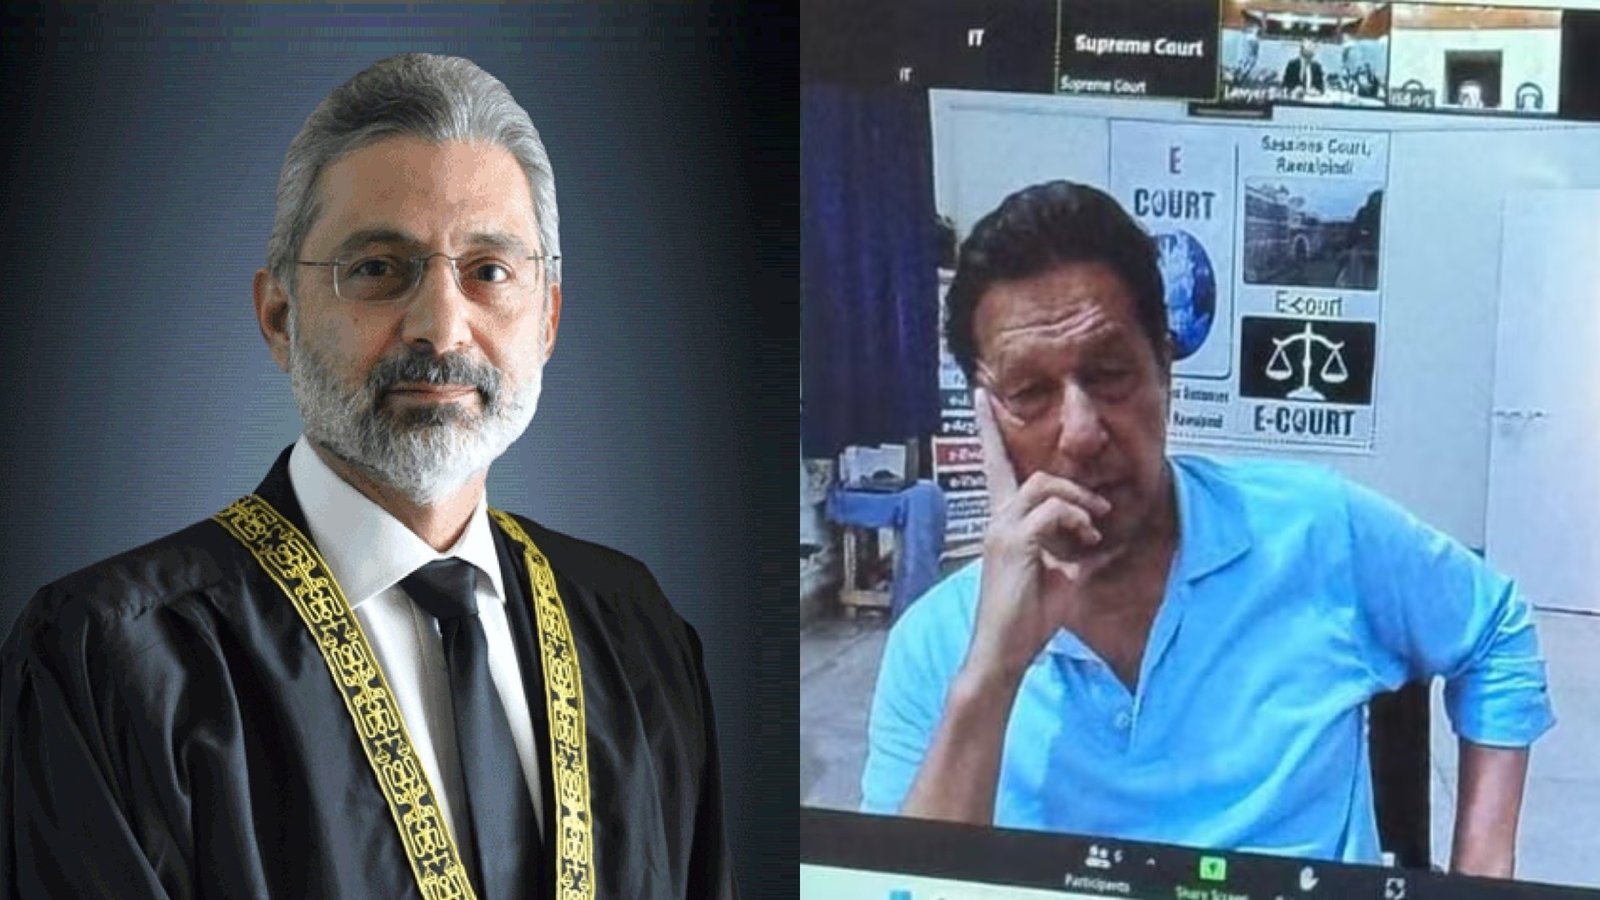 Chief Justice says Supreme Court not responsible for Imran Khan’s audio leak